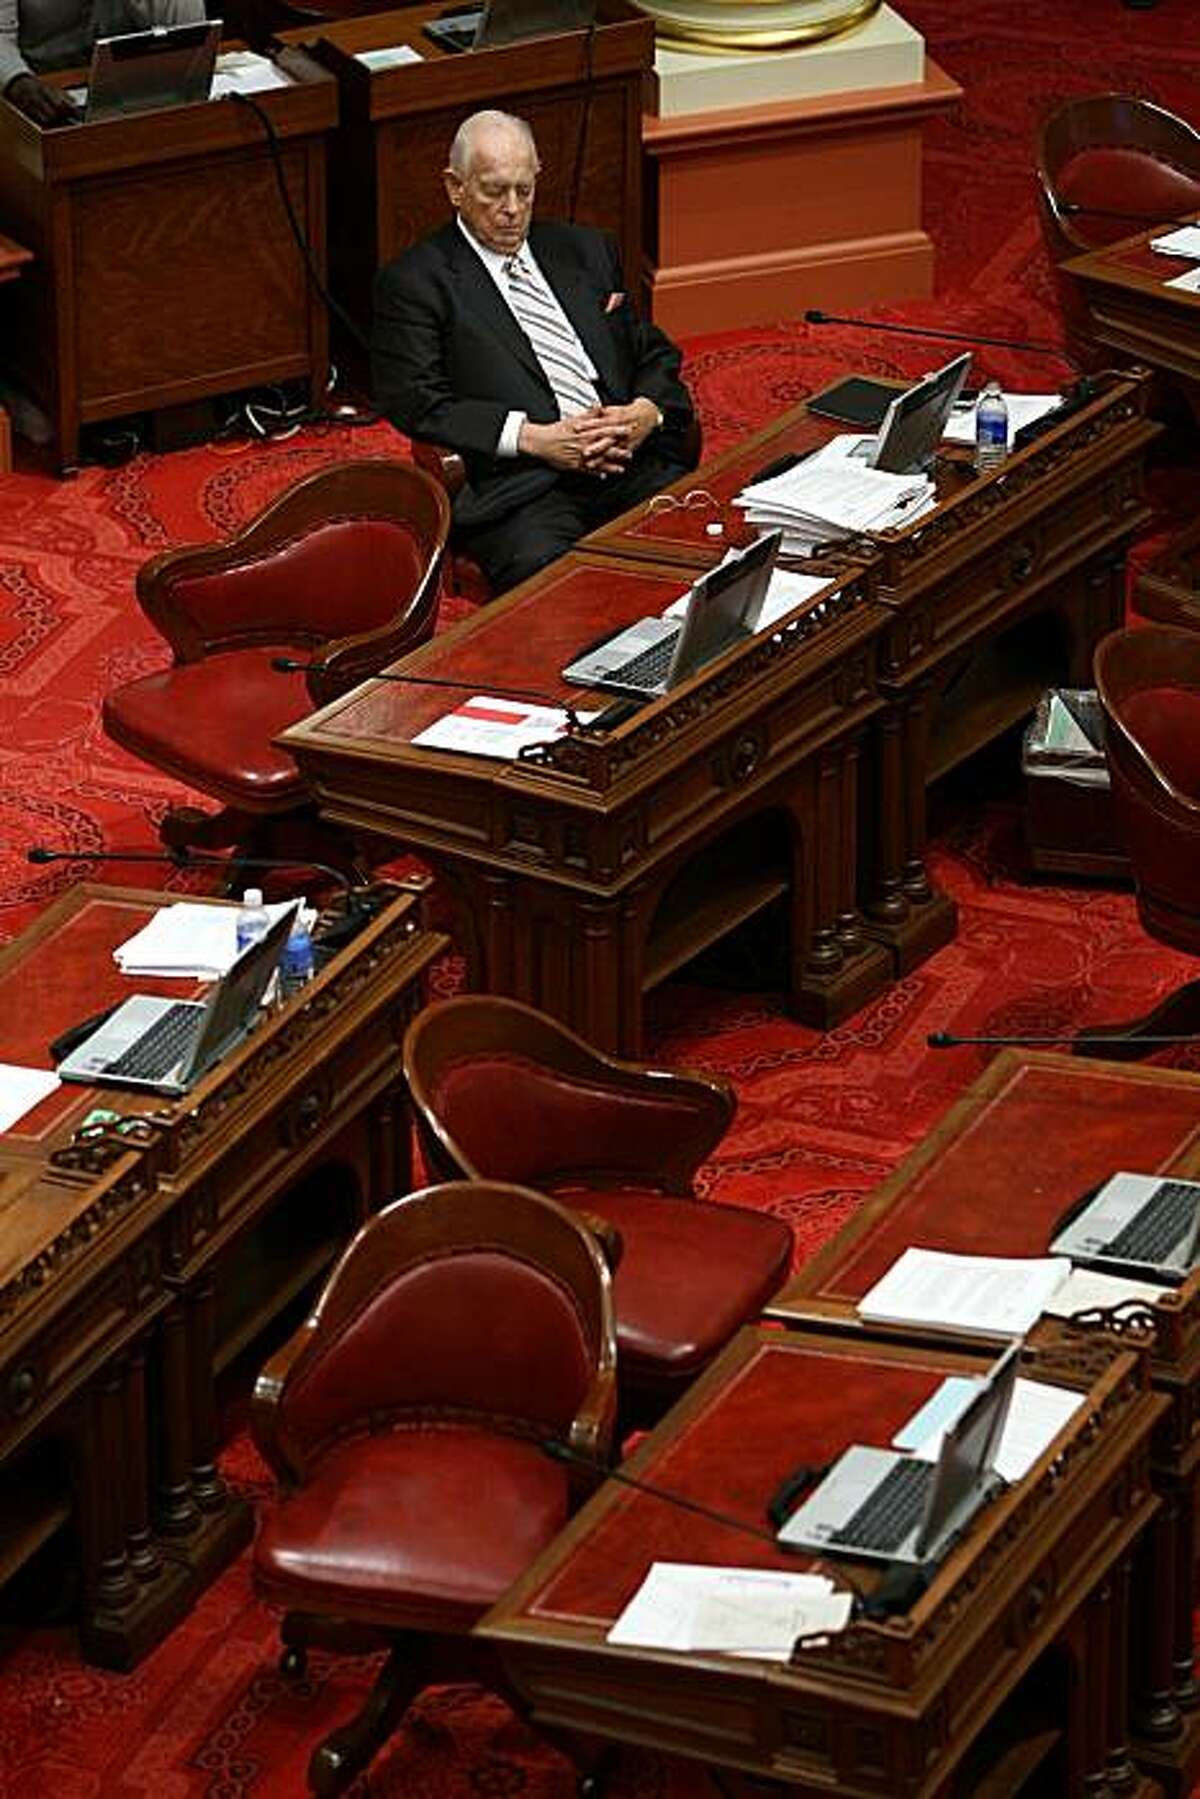 SACRAMENTO, CA - FEBRUARY 18: California State Sen. Dave Cox (R-Fair Oaks) sits alone in the Senate chambers during a recess of the California State Senate February 18, 2009 in Sacramento, California. The California legislature has delayed its vote on a State budget proposal after the GOP party ousted its leader, Dave Cogdill (R-Fresno). The stalled budget caused Governor Arnold Schwarzenegger to issue 20,000 pink slips to state workers and threatens hundreds of state funded public works projects. (Photo by Justin Sullivan/Getty Images)